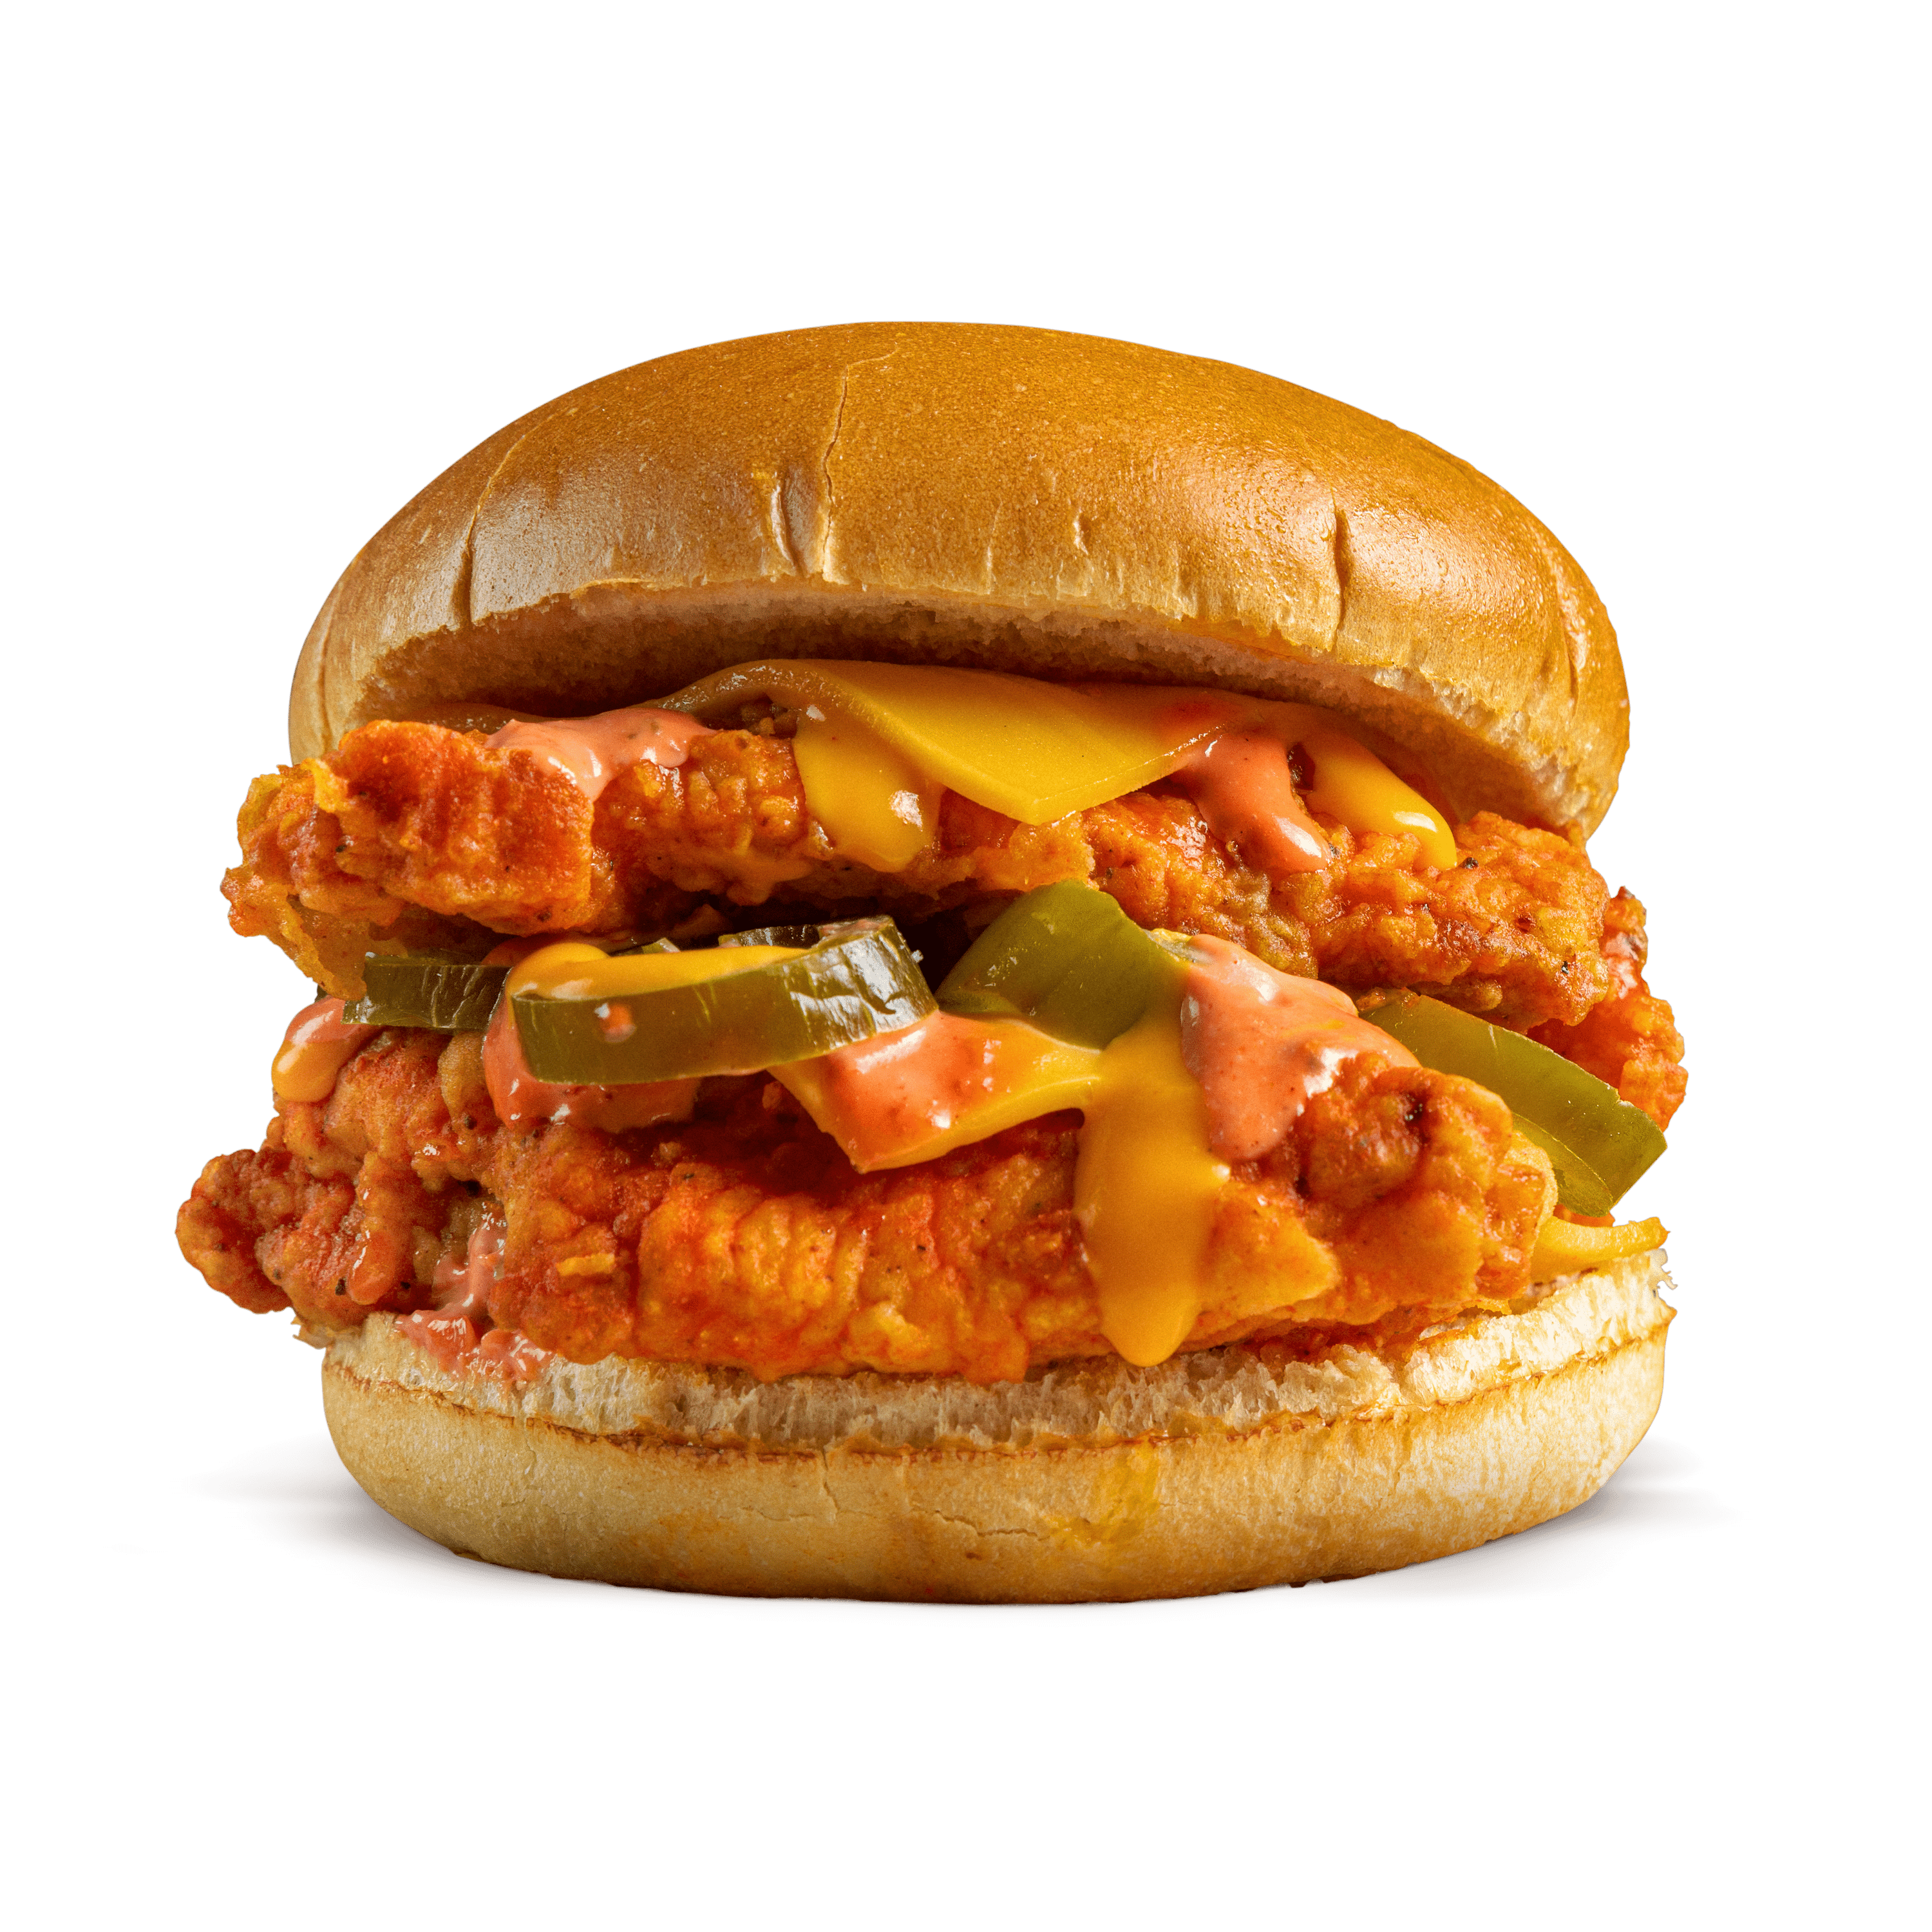 The Fiery Legend Burger - Meet our hottest chicken burger, topped with cheese, jalapeños and fiery sauce.